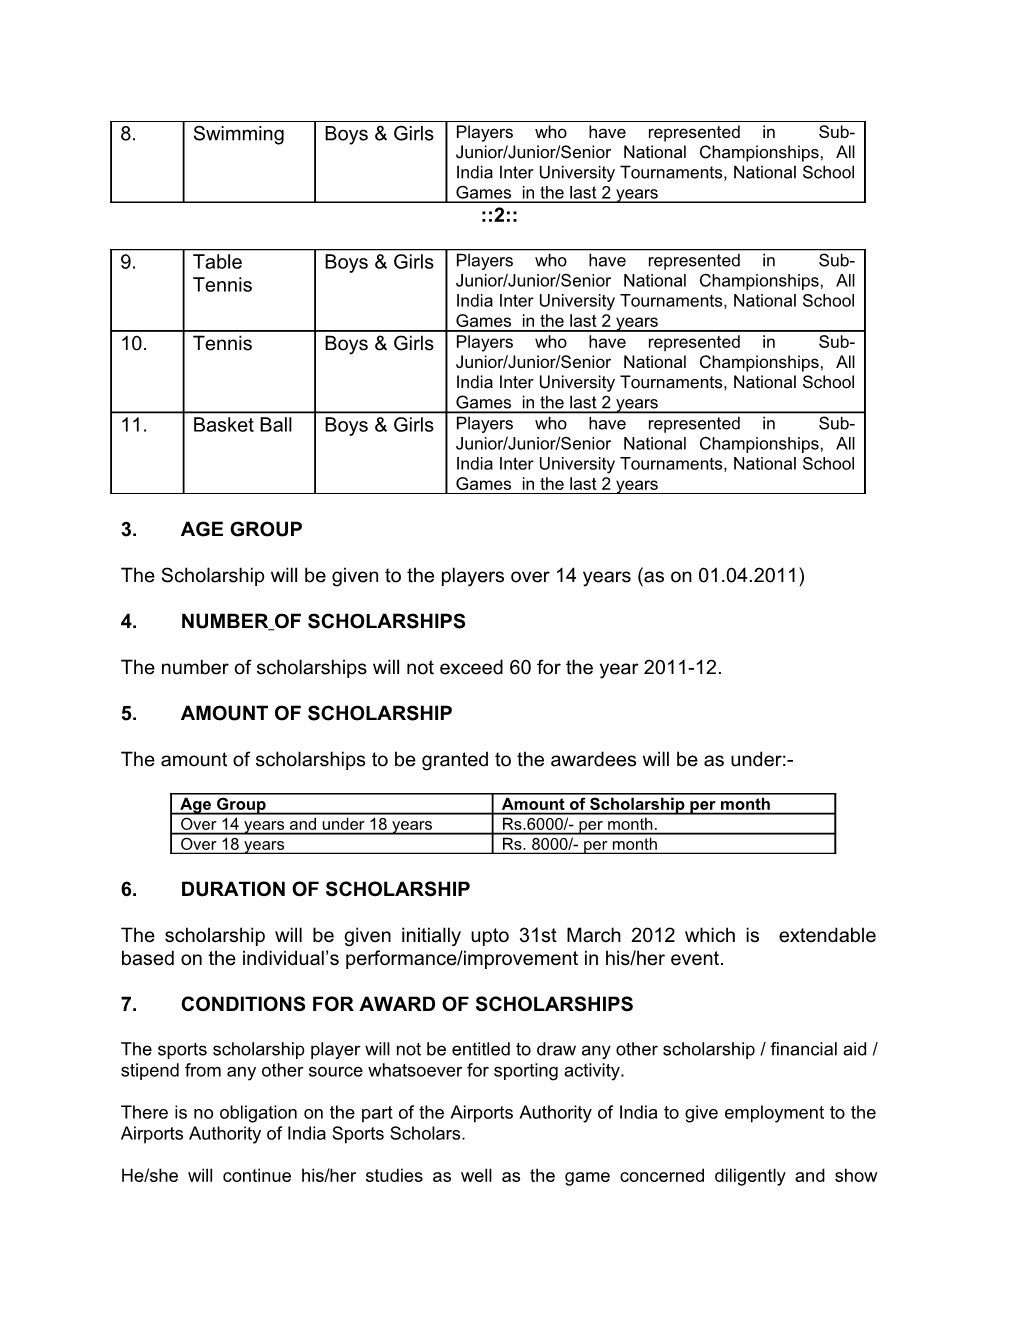 Sports Scholarship Scheme for Outstanding Sportspersons for the Financial Year 2011-2012